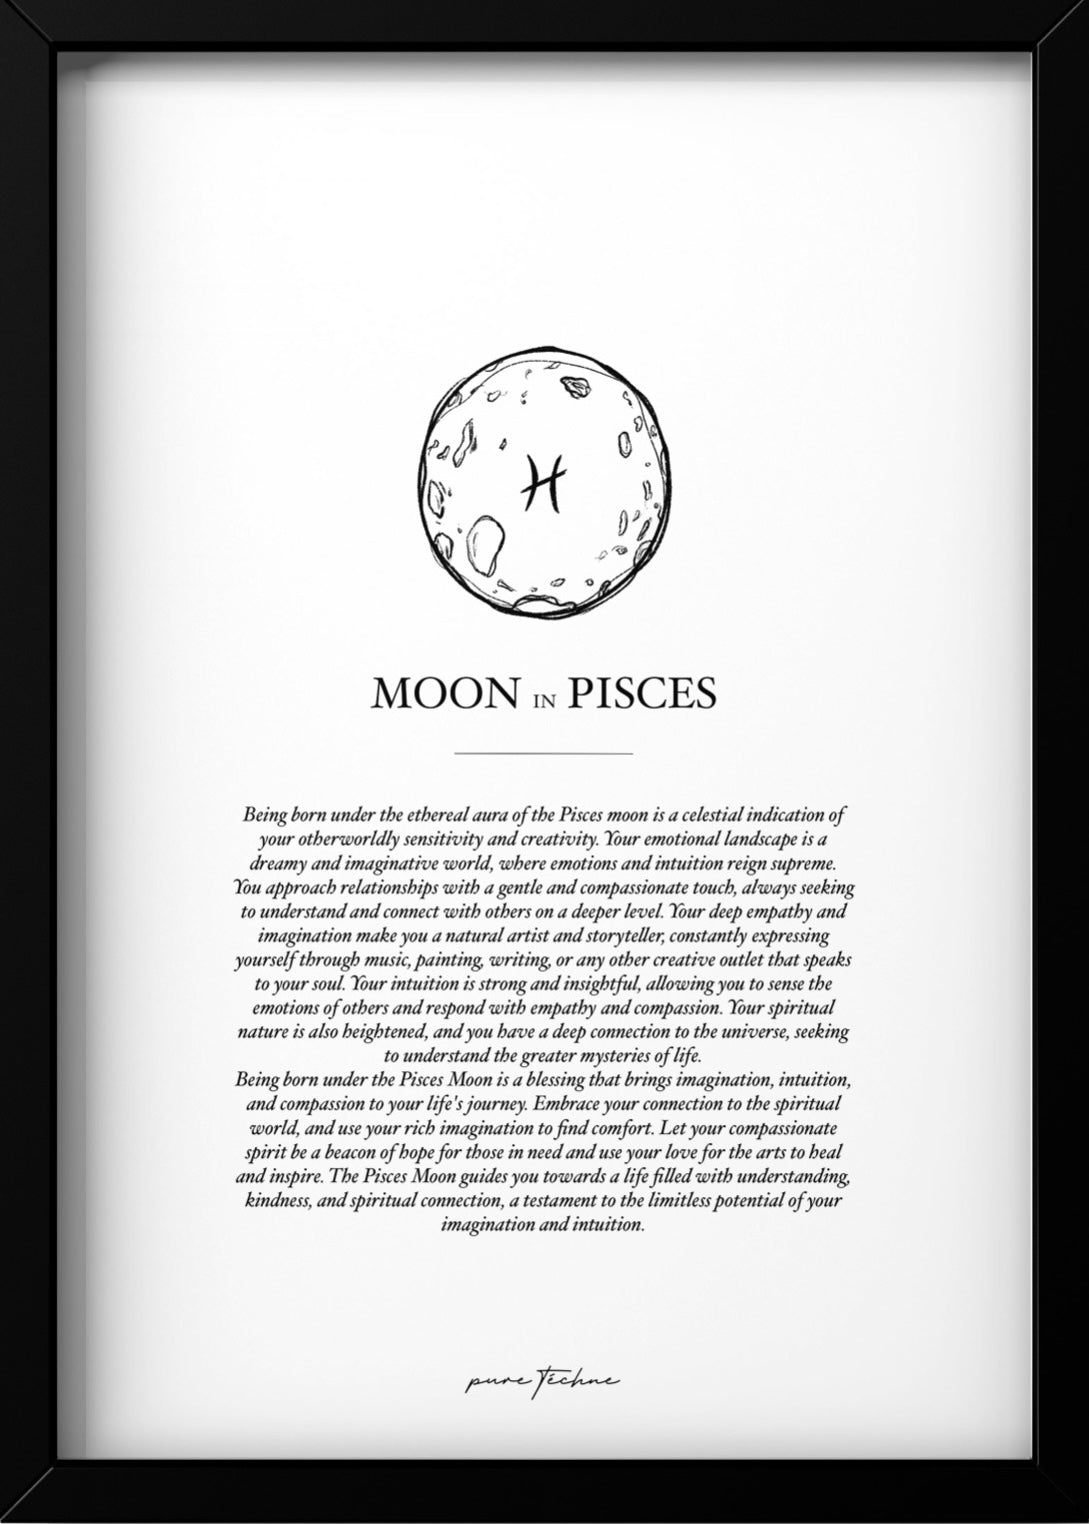 The Pisces Moon